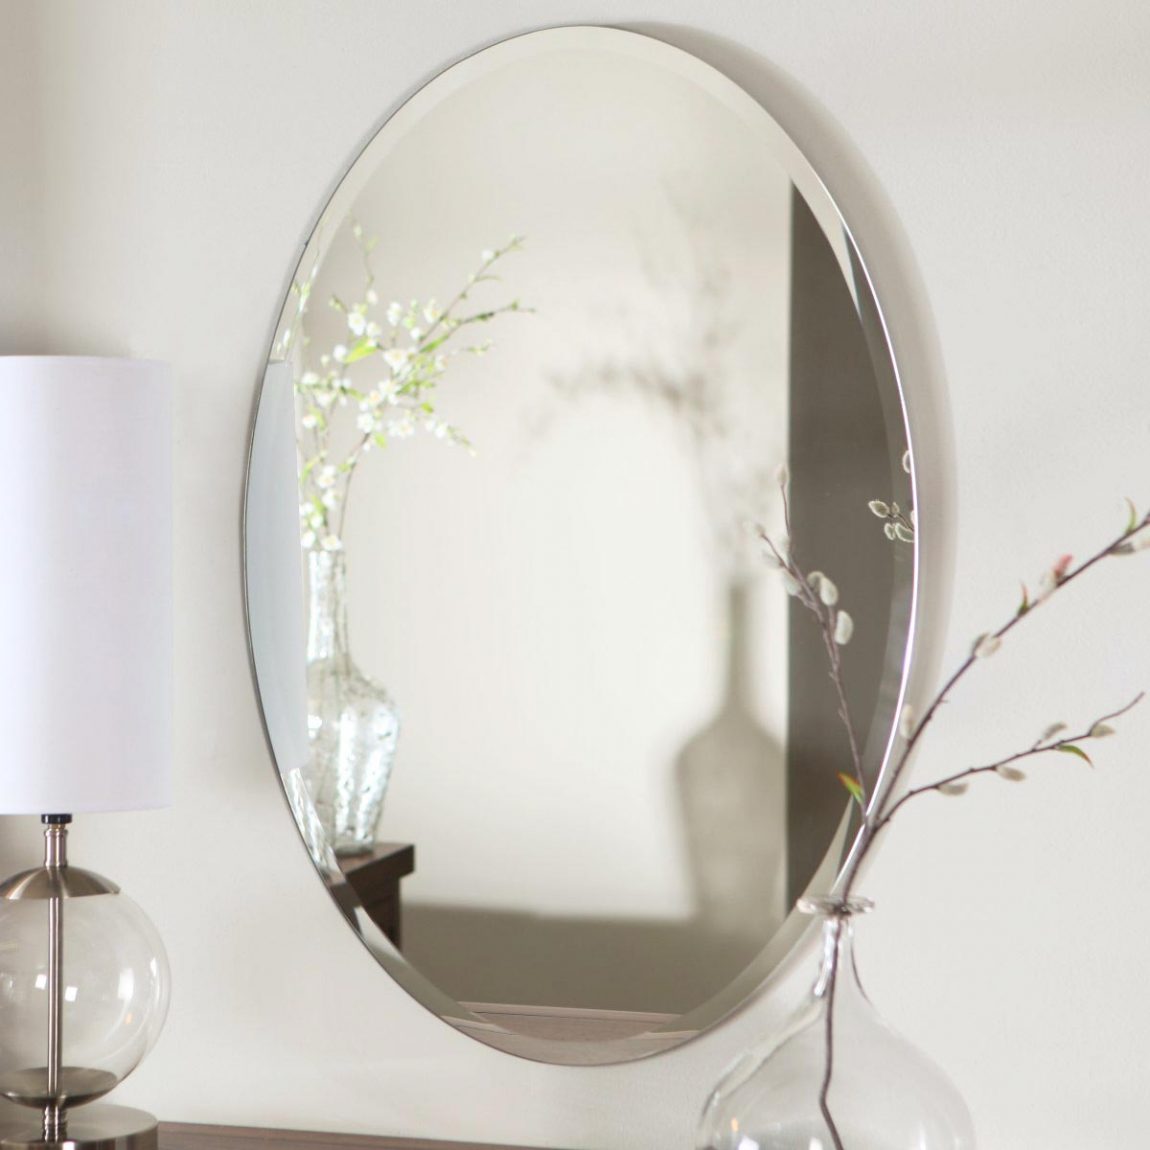 Bathroom Large-size Excellent Beautiful Oval Bathroom Mirror Design Ideas High Class Quality Oval Mirror With Beautiful Pearl Stone Replica Handcraft Frame Beautiful Oval Bathroom Wall Mirror Bathroom